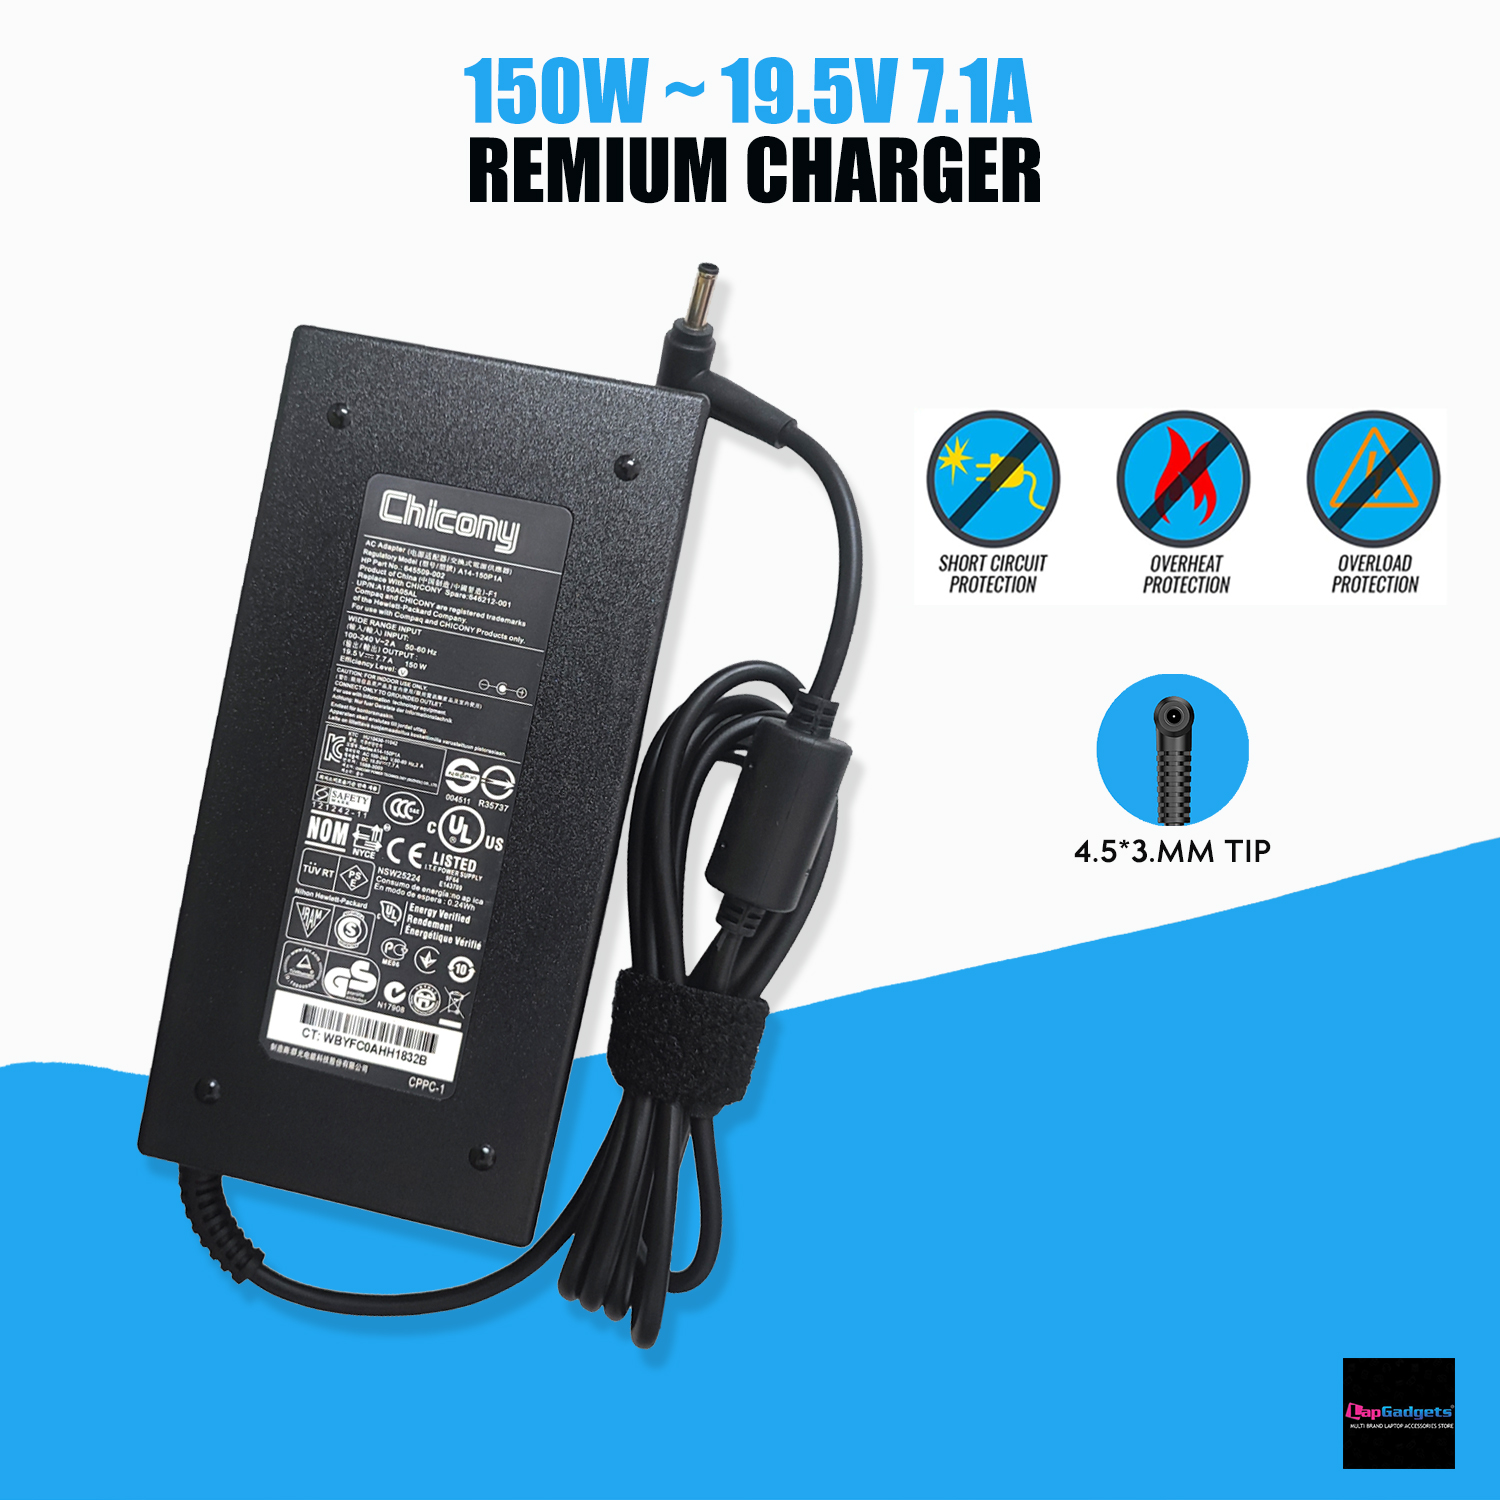 msi-150w-charger--4.5x3.0mm